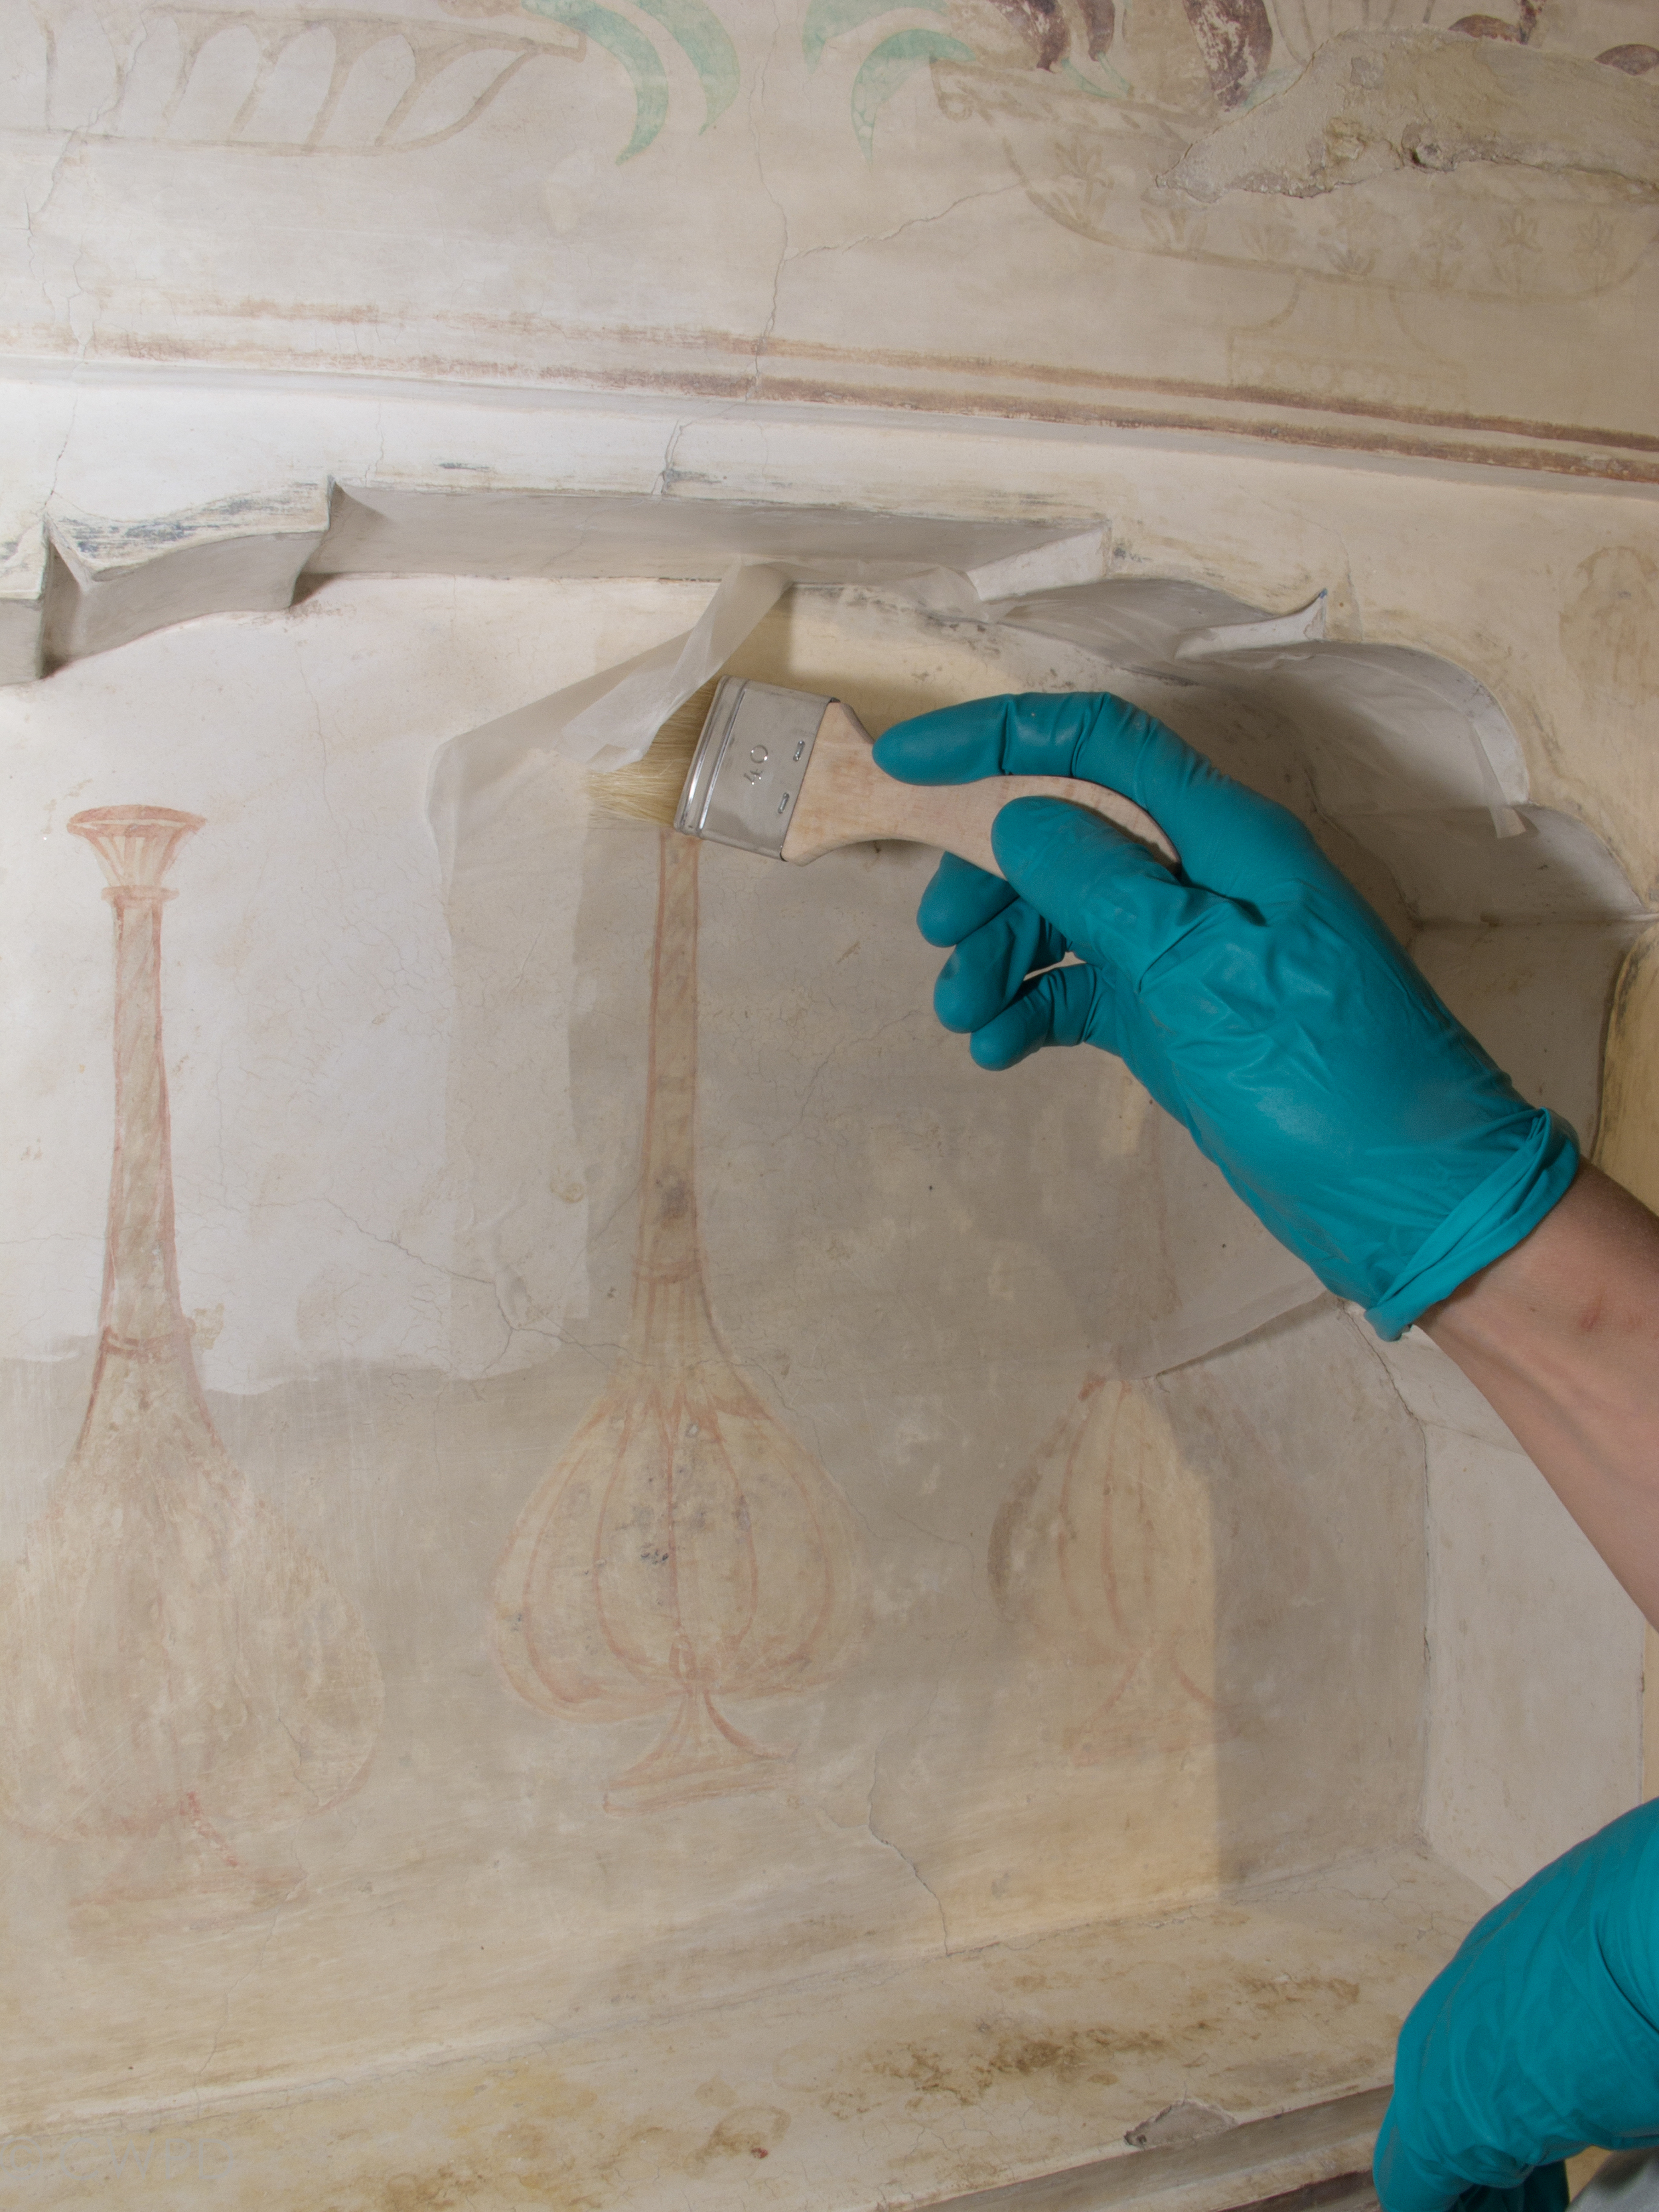  An intervention layer of tissue paper was then applied to the area.&nbsp;  Image © Courtauld CWPD 